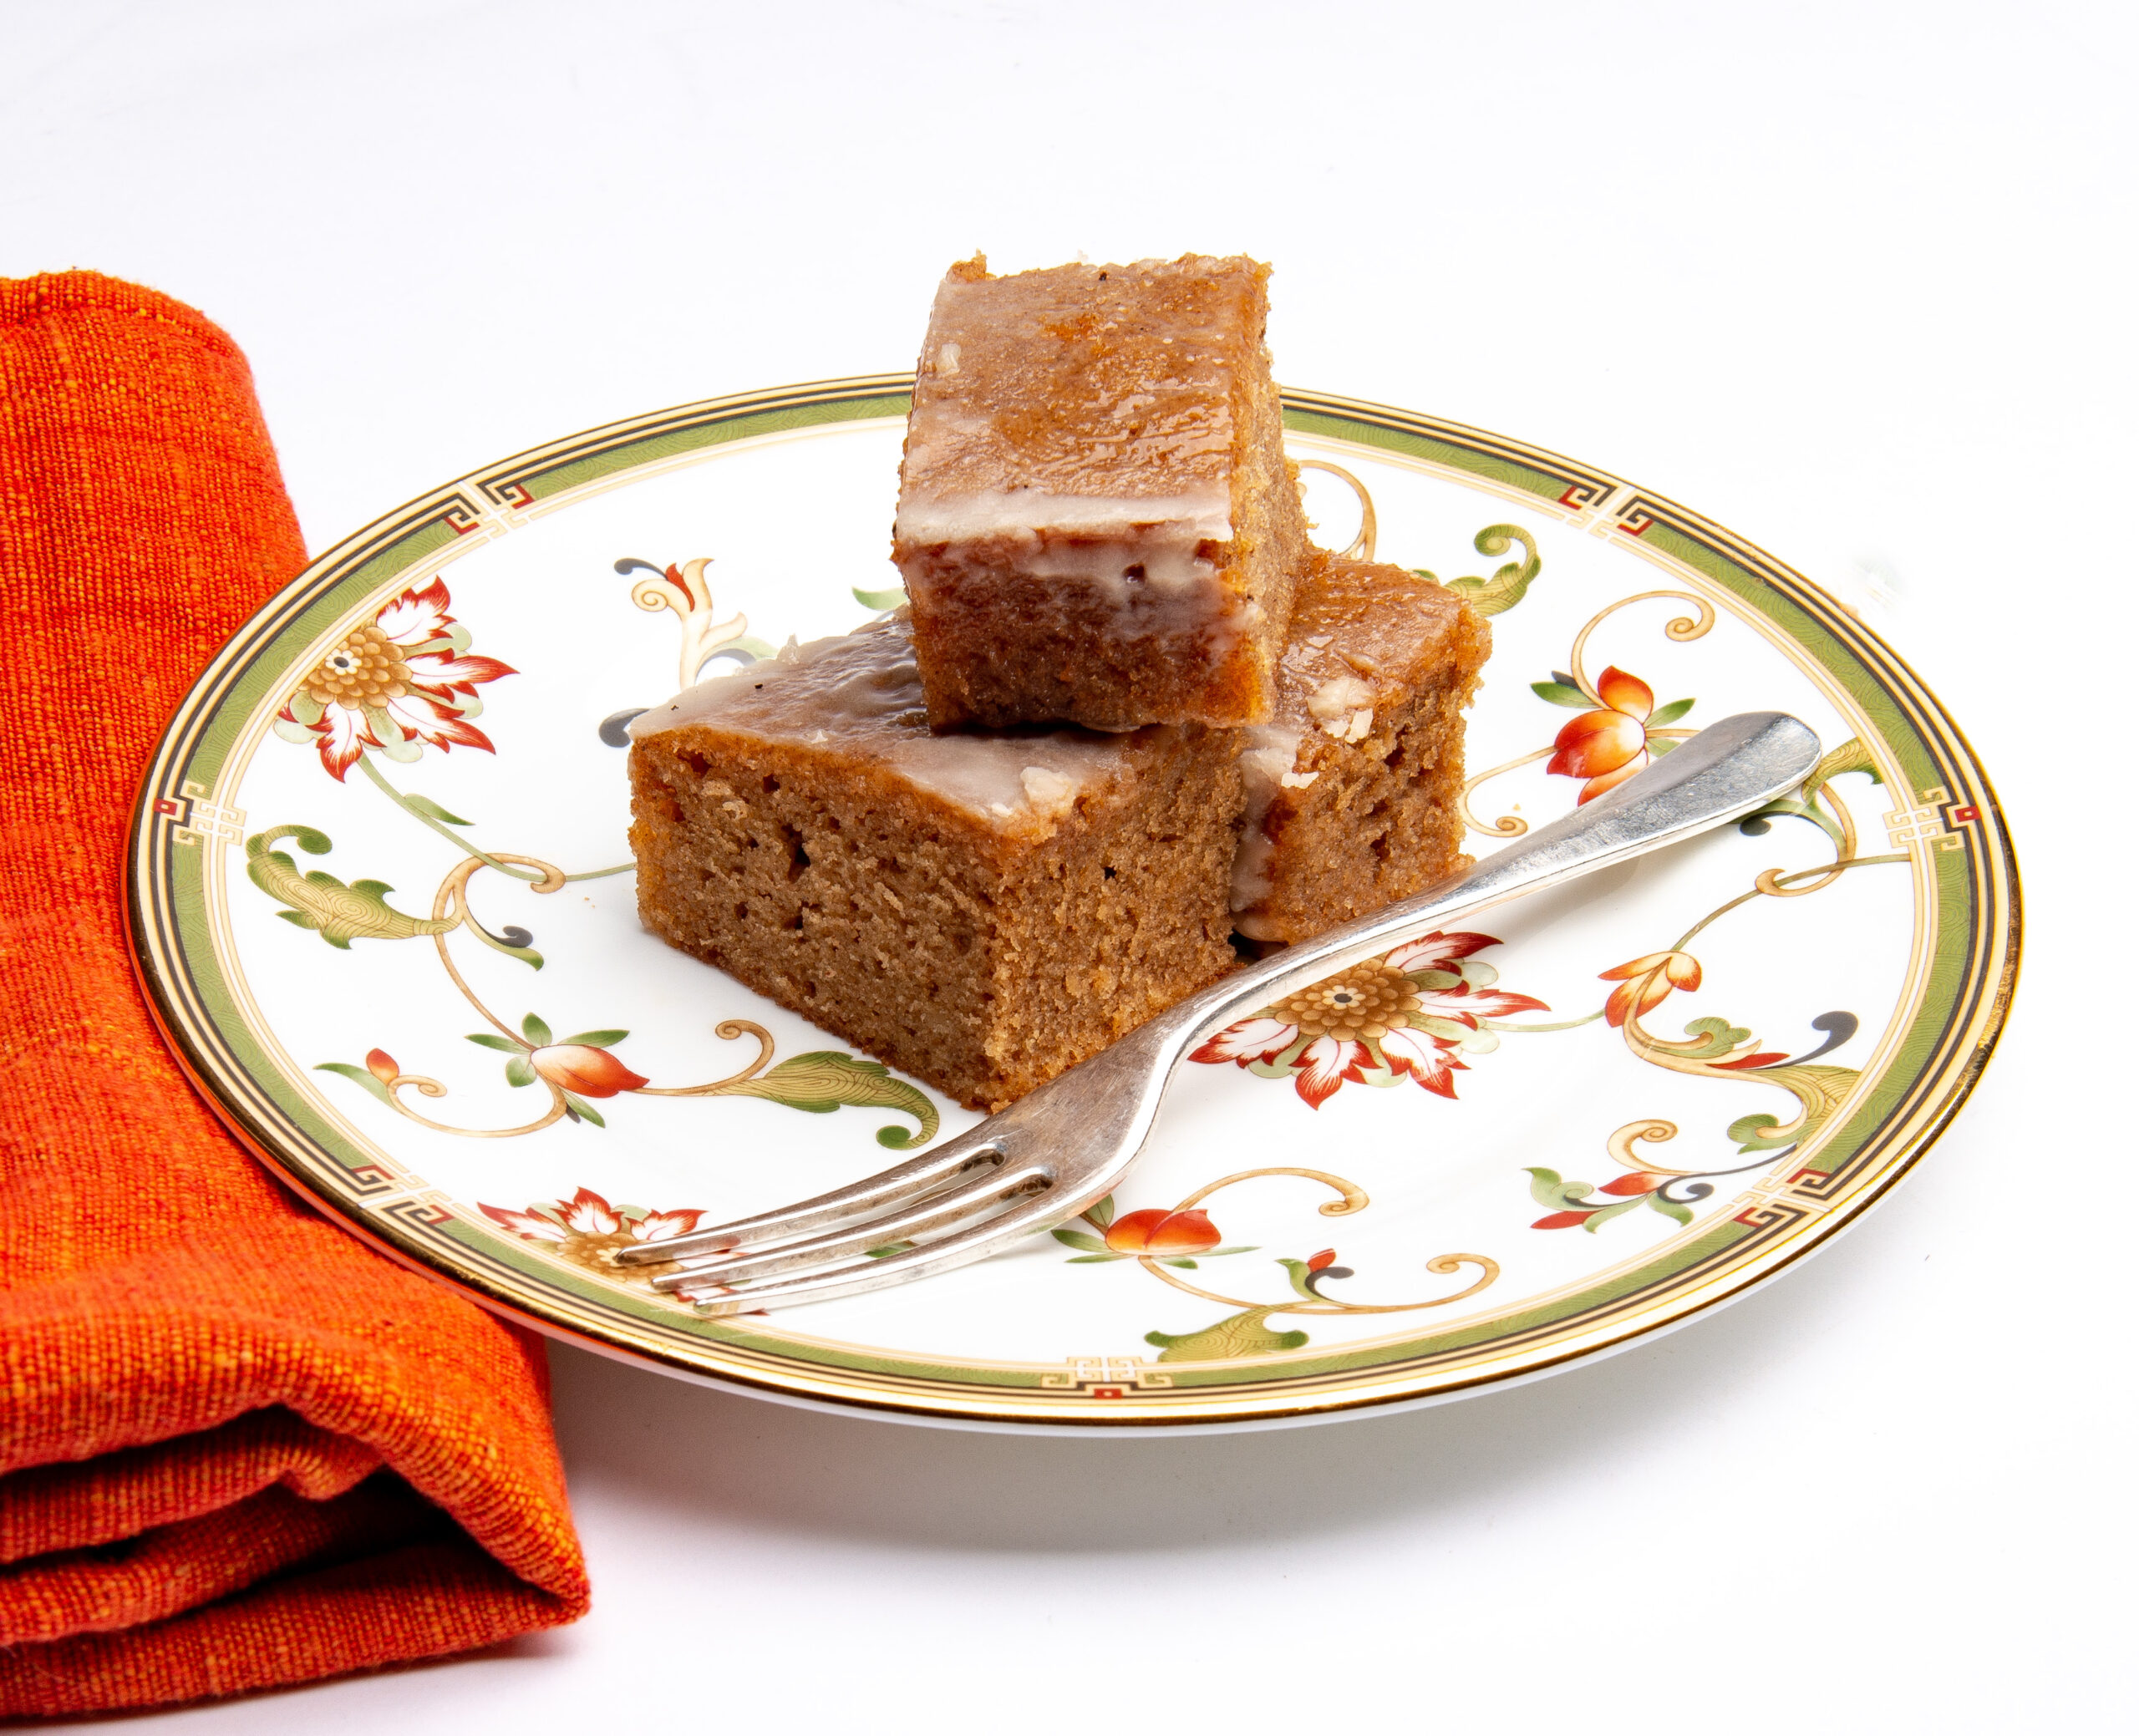 From Breakfast to a Late Night Snack, This is An Exceptional Spice Cake